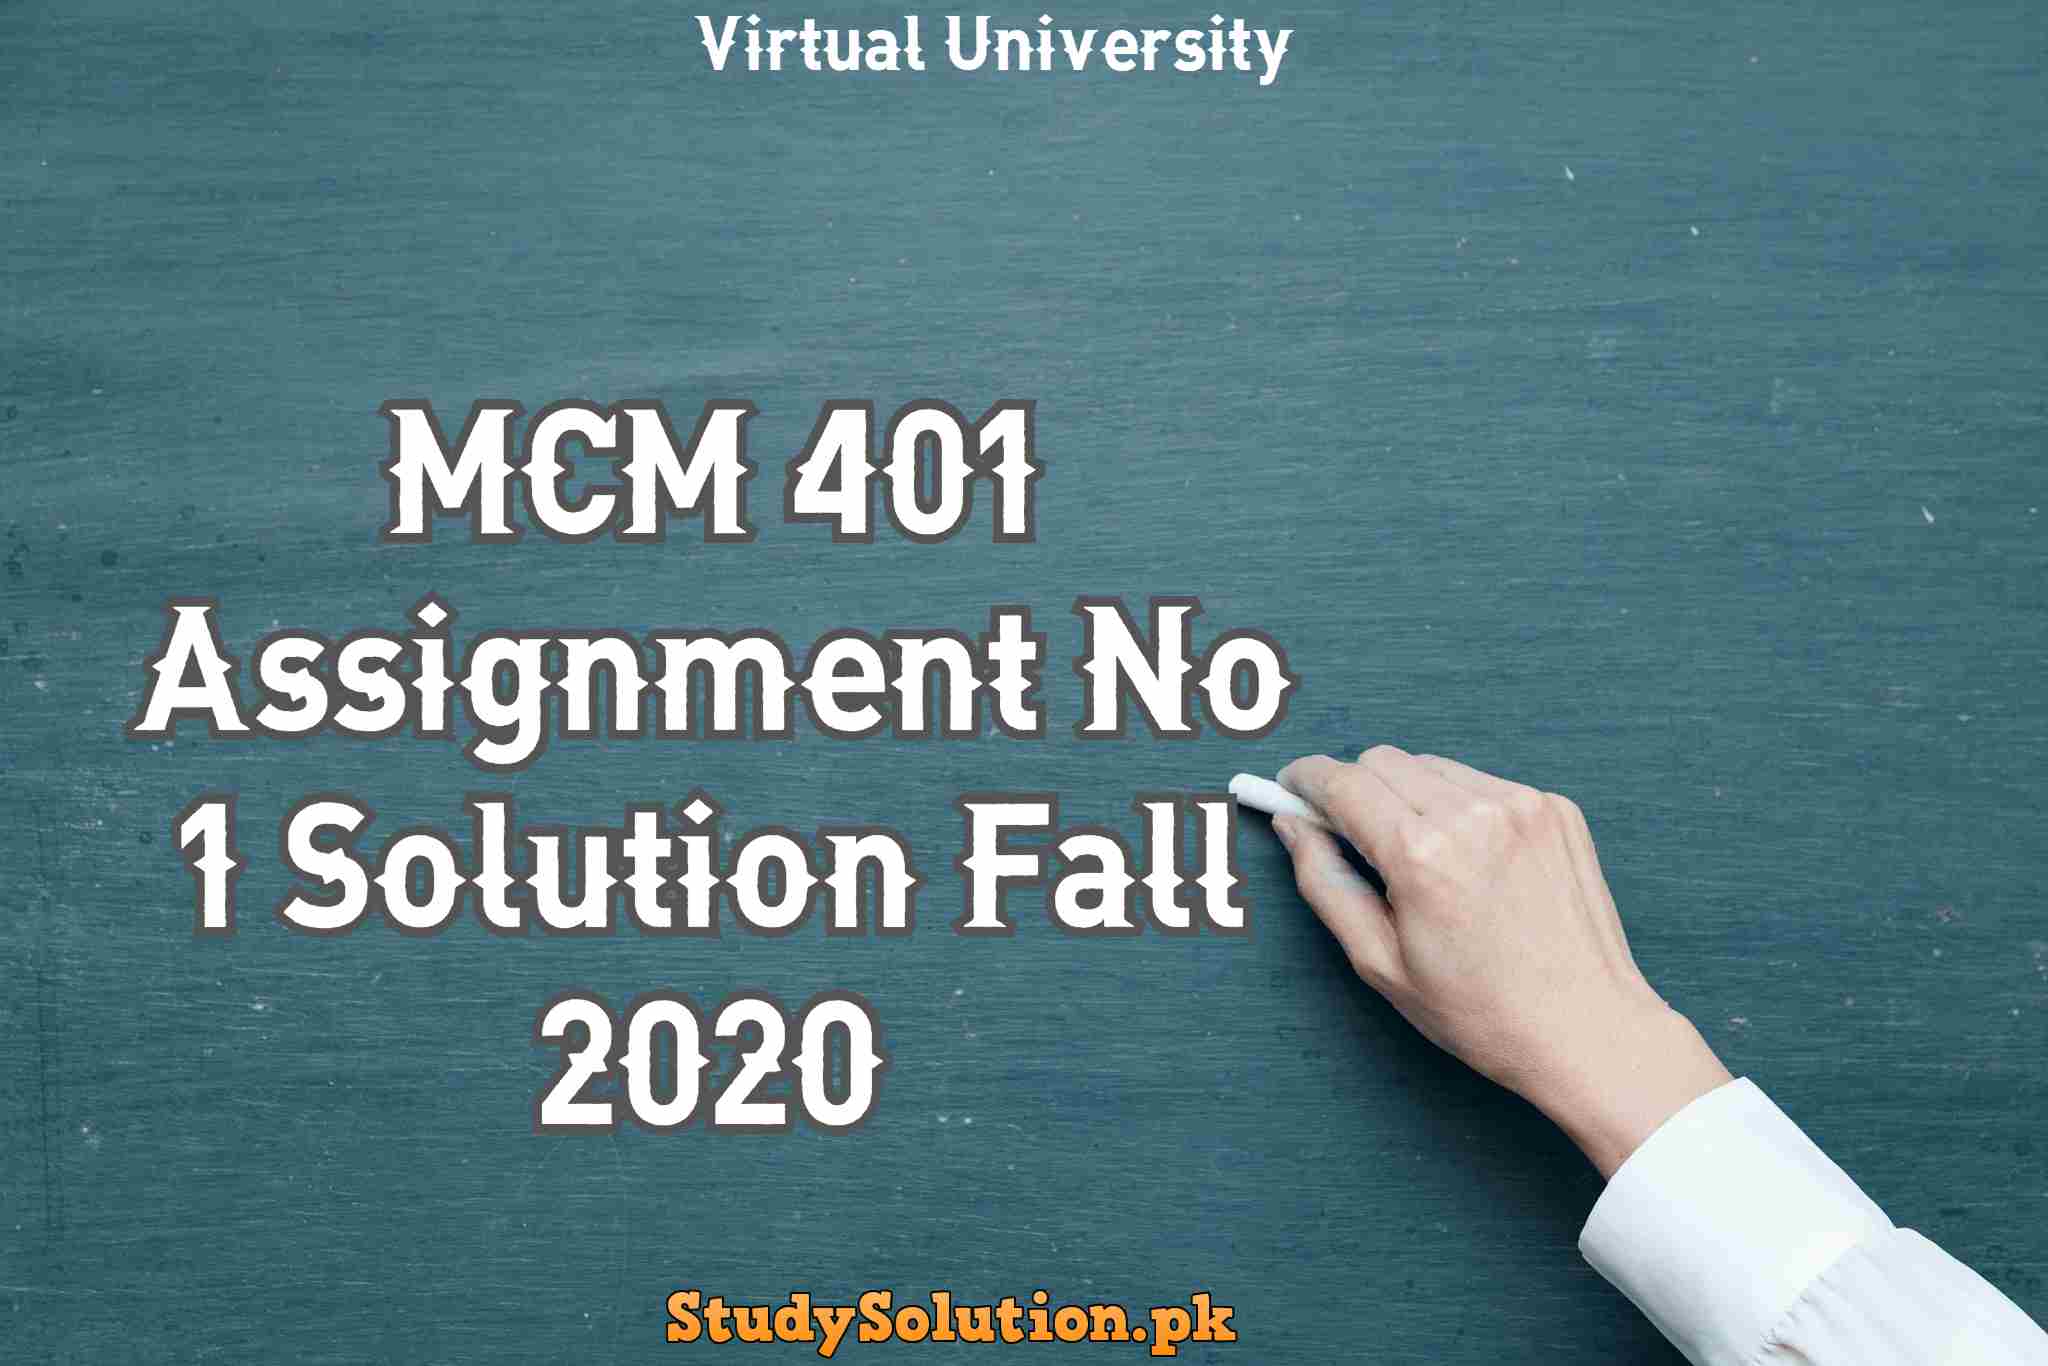 MCM 401 Assignment No 1 Solution Fall 2020